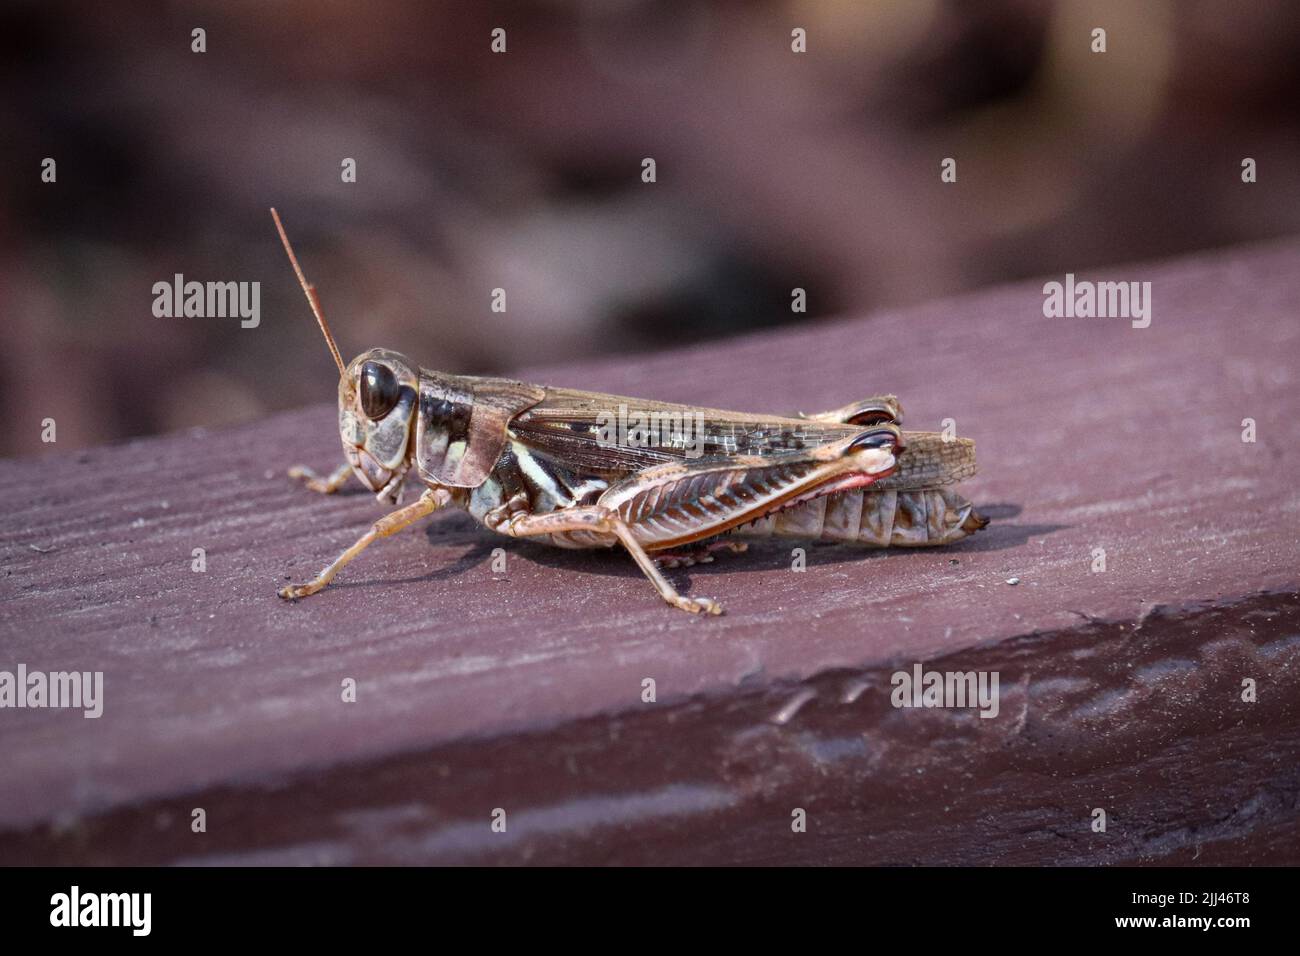 Spur-throated grasshopper or Melanoplus standing on the side of a garden in Payson, Arizona. Stock Photo